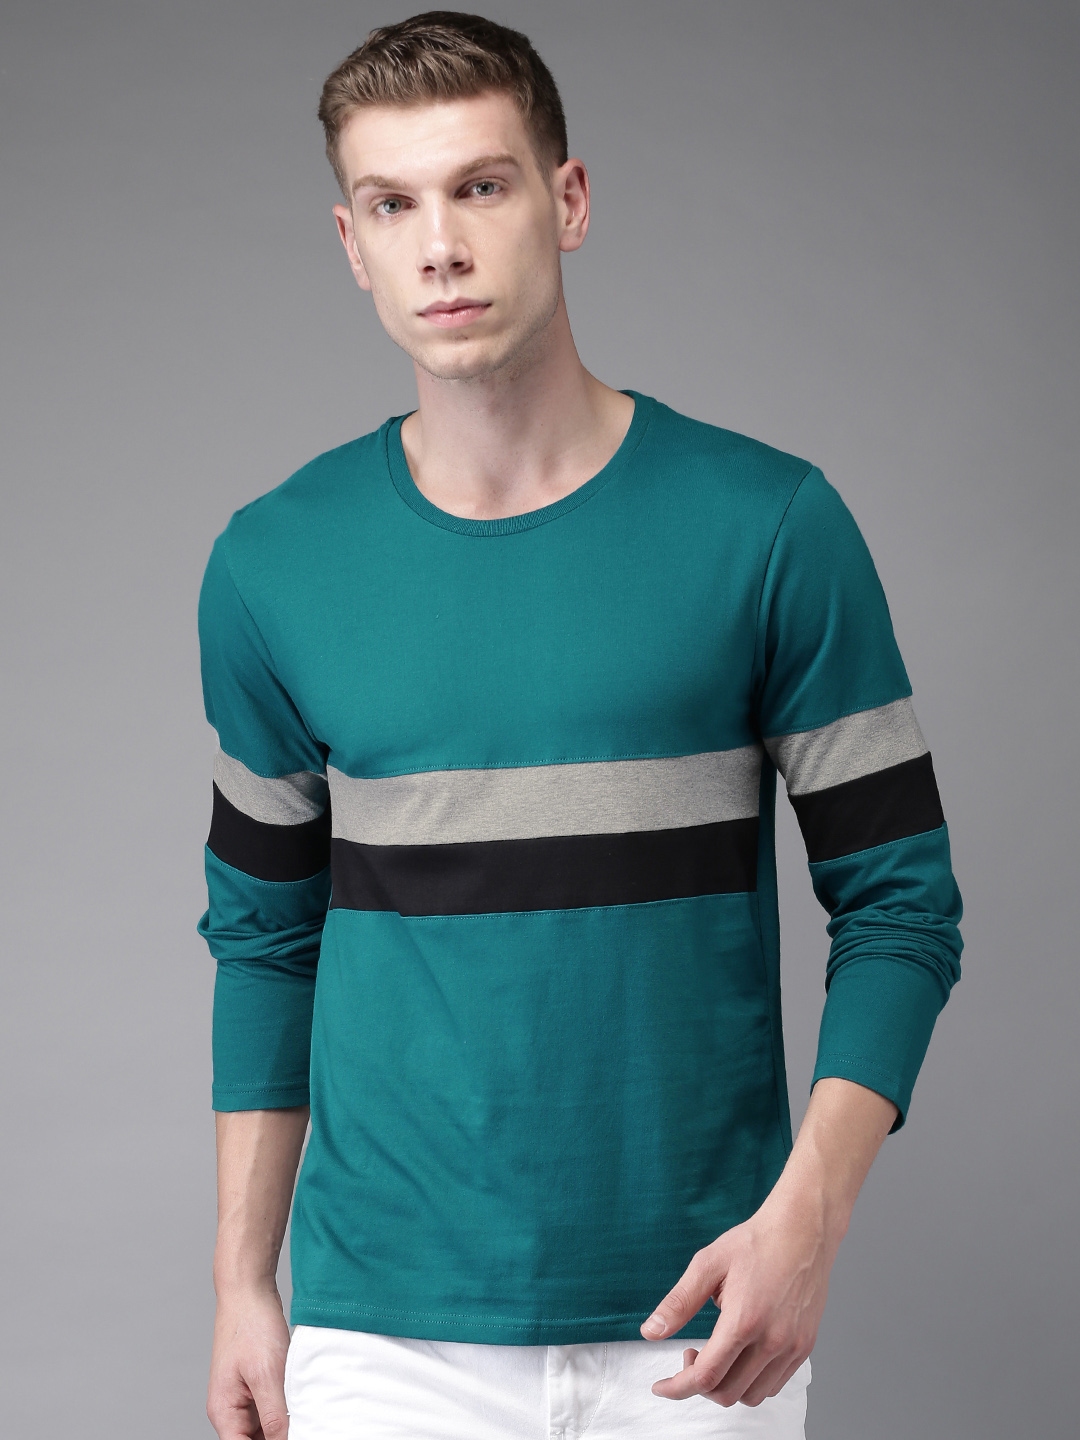 Buy HERE&NOW Men Teal Green Solid Round Neck T Shirt - Tshirts for Men ...